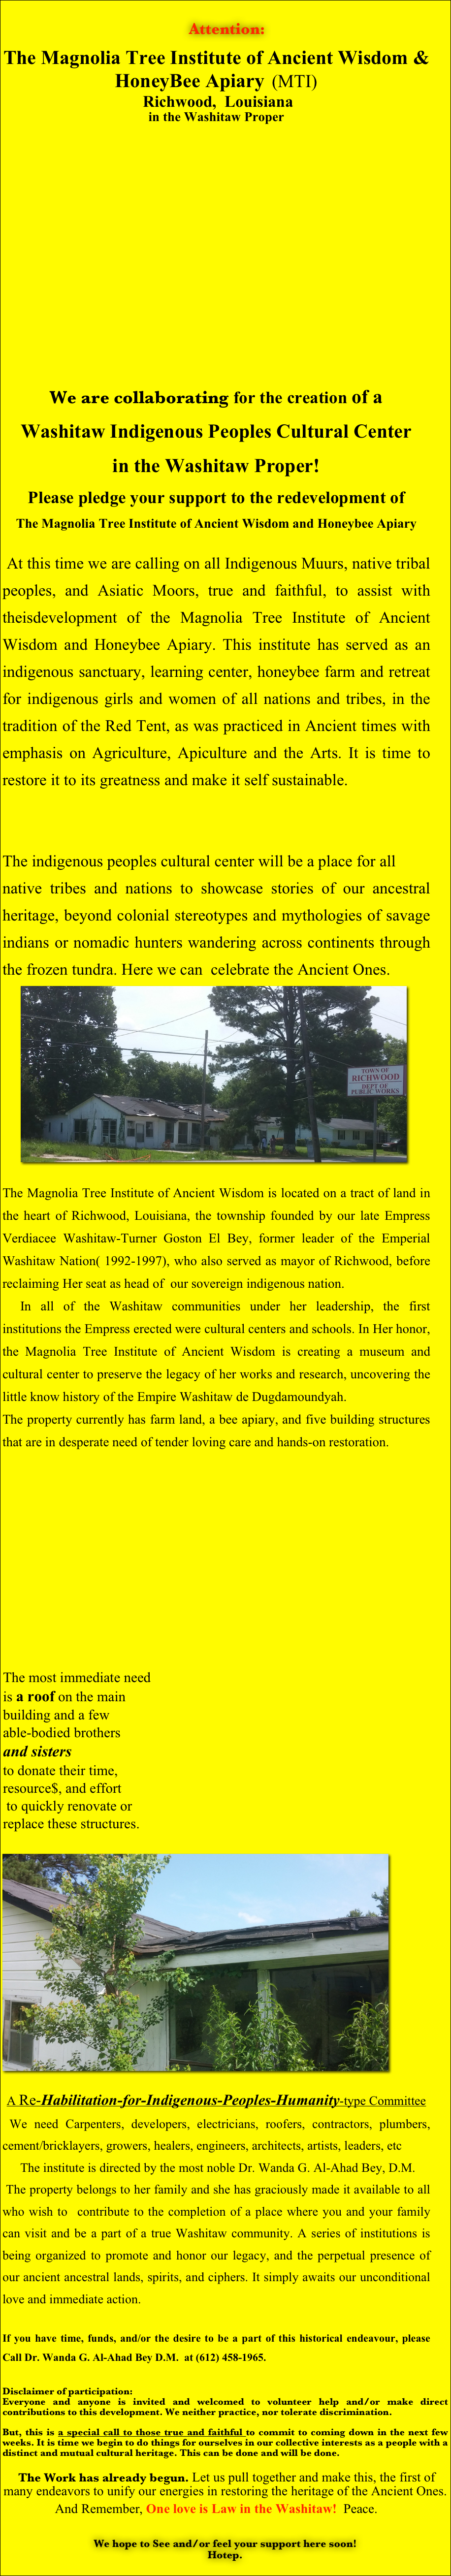 
 Attention: 

The Magnolia Tree Institute of Ancient Wisdom & HoneyBee Apiary  (MTI)
 Richwood,  Louisiana
in the Washitaw Proper















We are collaborating for the creation of a 
Washitaw Indigenous Peoples Cultural Center 
in the Washitaw Proper!
Please pledge your support to the redevelopment of
The Magnolia Tree Institute of Ancient Wisdom and Honeybee Apiary

 At this time we are calling on all Indigenous Muurs, native tribal peoples, and Asiatic Moors, true and faithful, to assist with theisdevelopment of the Magnolia Tree Institute of Ancient Wisdom and Honeybee Apiary. This institute has served as an indigenous sanctuary, learning center, honeybee farm and retreat for indigenous girls and women of all nations and tribes, in the tradition of the Red Tent, as was practiced in Ancient times with emphasis on Agriculture, Apiculture and the Arts. It is time to restore it to its greatness and make it self sustainable.


The indigenous peoples cultural center will be a place for all
native tribes and nations to showcase stories of our ancestral heritage, beyond colonial stereotypes and mythologies of savage indians or nomadic hunters wandering across continents through the frozen tundra. Here we can  celebrate the Ancient Ones.
	￼

The Magnolia Tree Institute of Ancient Wisdom is located on a tract of land in  the heart of Richwood, Louisiana, the township founded by our late Empress Verdiacee Washitaw-Turner Goston El Bey, former leader of the Emperial Washitaw Nation( 1992-1997), who also served as mayor of Richwood, before reclaiming Her seat as head of  our sovereign indigenous nation.
	In all of the Washitaw communities under her leadership, the first institutions the Empress erected were cultural centers and schools. In Her honor, the Magnolia Tree Institute of Ancient Wisdom is creating a museum and cultural center to preserve the legacy of her works and research, uncovering the little know history of the Empire Washitaw de Dugdamoundyah.
The property currently has farm land, a bee apiary, and five building structures that are in desperate need of tender loving care and hands-on restoration. 













￼  ￼
	
A Re-Habilitation-for-Indigenous-Peoples-Humanity-type Committee
 We need Carpenters, developers, electricians, roofers, contractors, plumbers, cement/bricklayers, growers, healers, engineers, architects, artists, leaders, etc
	The institute is directed by the most noble Dr. Wanda G. Al-Ahad Bey, D.M. 
 The property belongs to her family and she has graciously made it available to all who wish to  contribute to the completion of a place where you and your family can visit and be a part of a true Washitaw community. A series of institutions is  being organized to promote and honor our legacy, and the perpetual presence of our ancient ancestral lands, spirits, and ciphers. It simply awaits our unconditional love and immediate action.  

If you have time, funds, and/or the desire to be a part of this historical endeavour, please Call Dr. Wanda G. Al-Ahad Bey D.M.  at (612) 458-1965.    
	
Disclaimer of participation:
Everyone and anyone is invited and welcomed to volunteer help and/or make direct contributions to this development. We neither practice, nor tolerate discrimination.

But, this is a special call to those true and faithful to commit to coming down in the next few weeks. It is time we begin to do things for ourselves in our collective interests as a people with a distinct and mutual cultural heritage. This can be done and will be done.

 The Work has already begun. Let us pull together and make this, the first of many endeavors to unify our energies in restoring the heritage of the Ancient Ones. 
And Remember, One love is Law in the Washitaw!  Peace. 

We hope to See and/or feel your support here soon!
Hotep.
